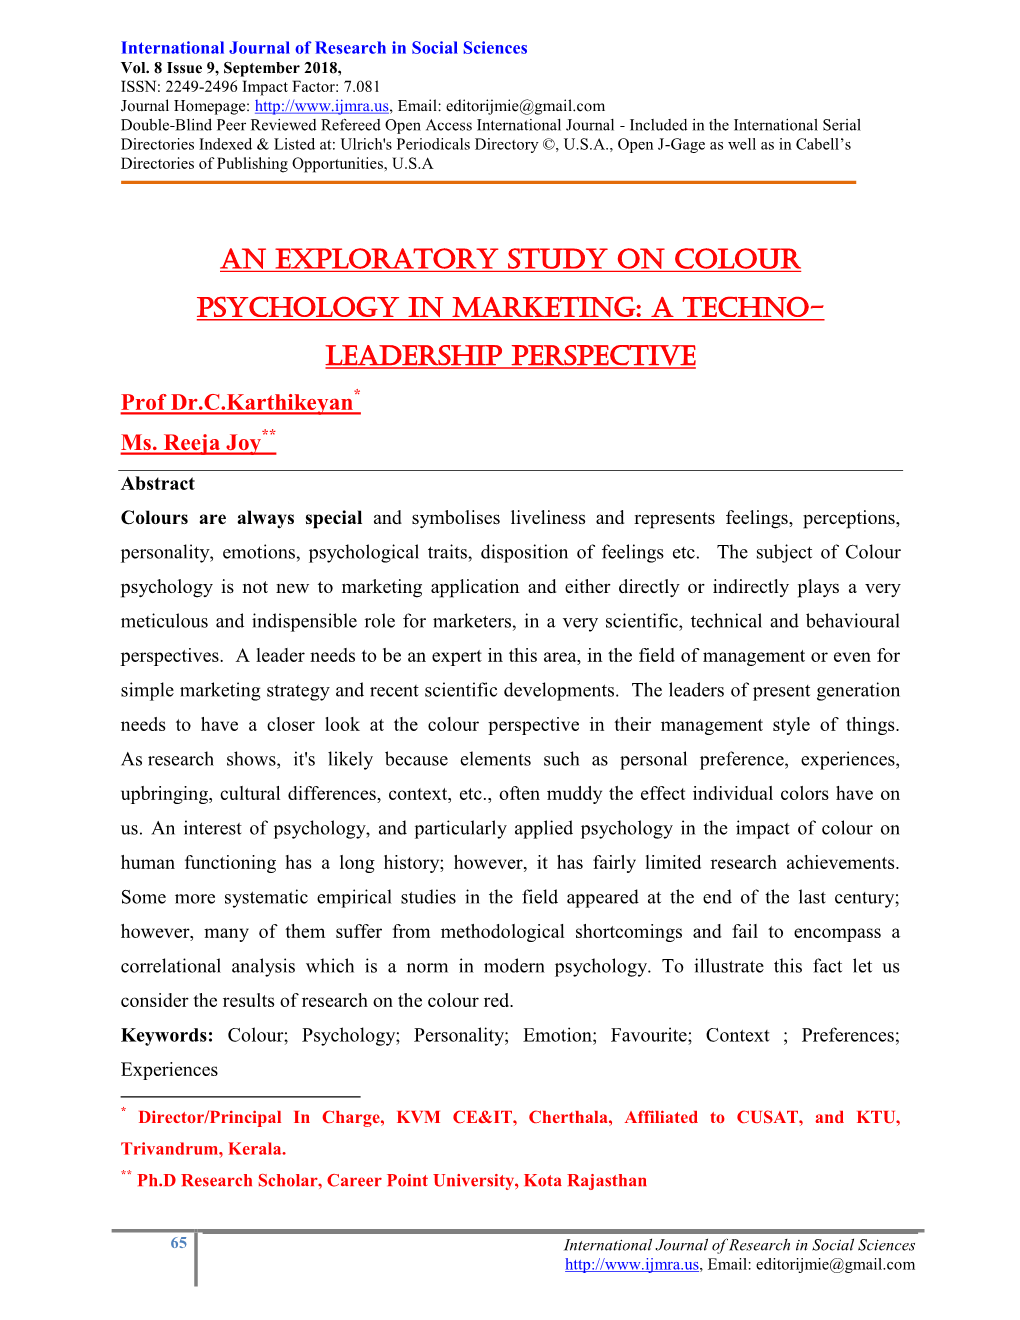 An Exploratory Study on Colour Psychology in Marketing: a Techno- Leadership Perspective Prof Dr.C.Karthikeyan* Ms